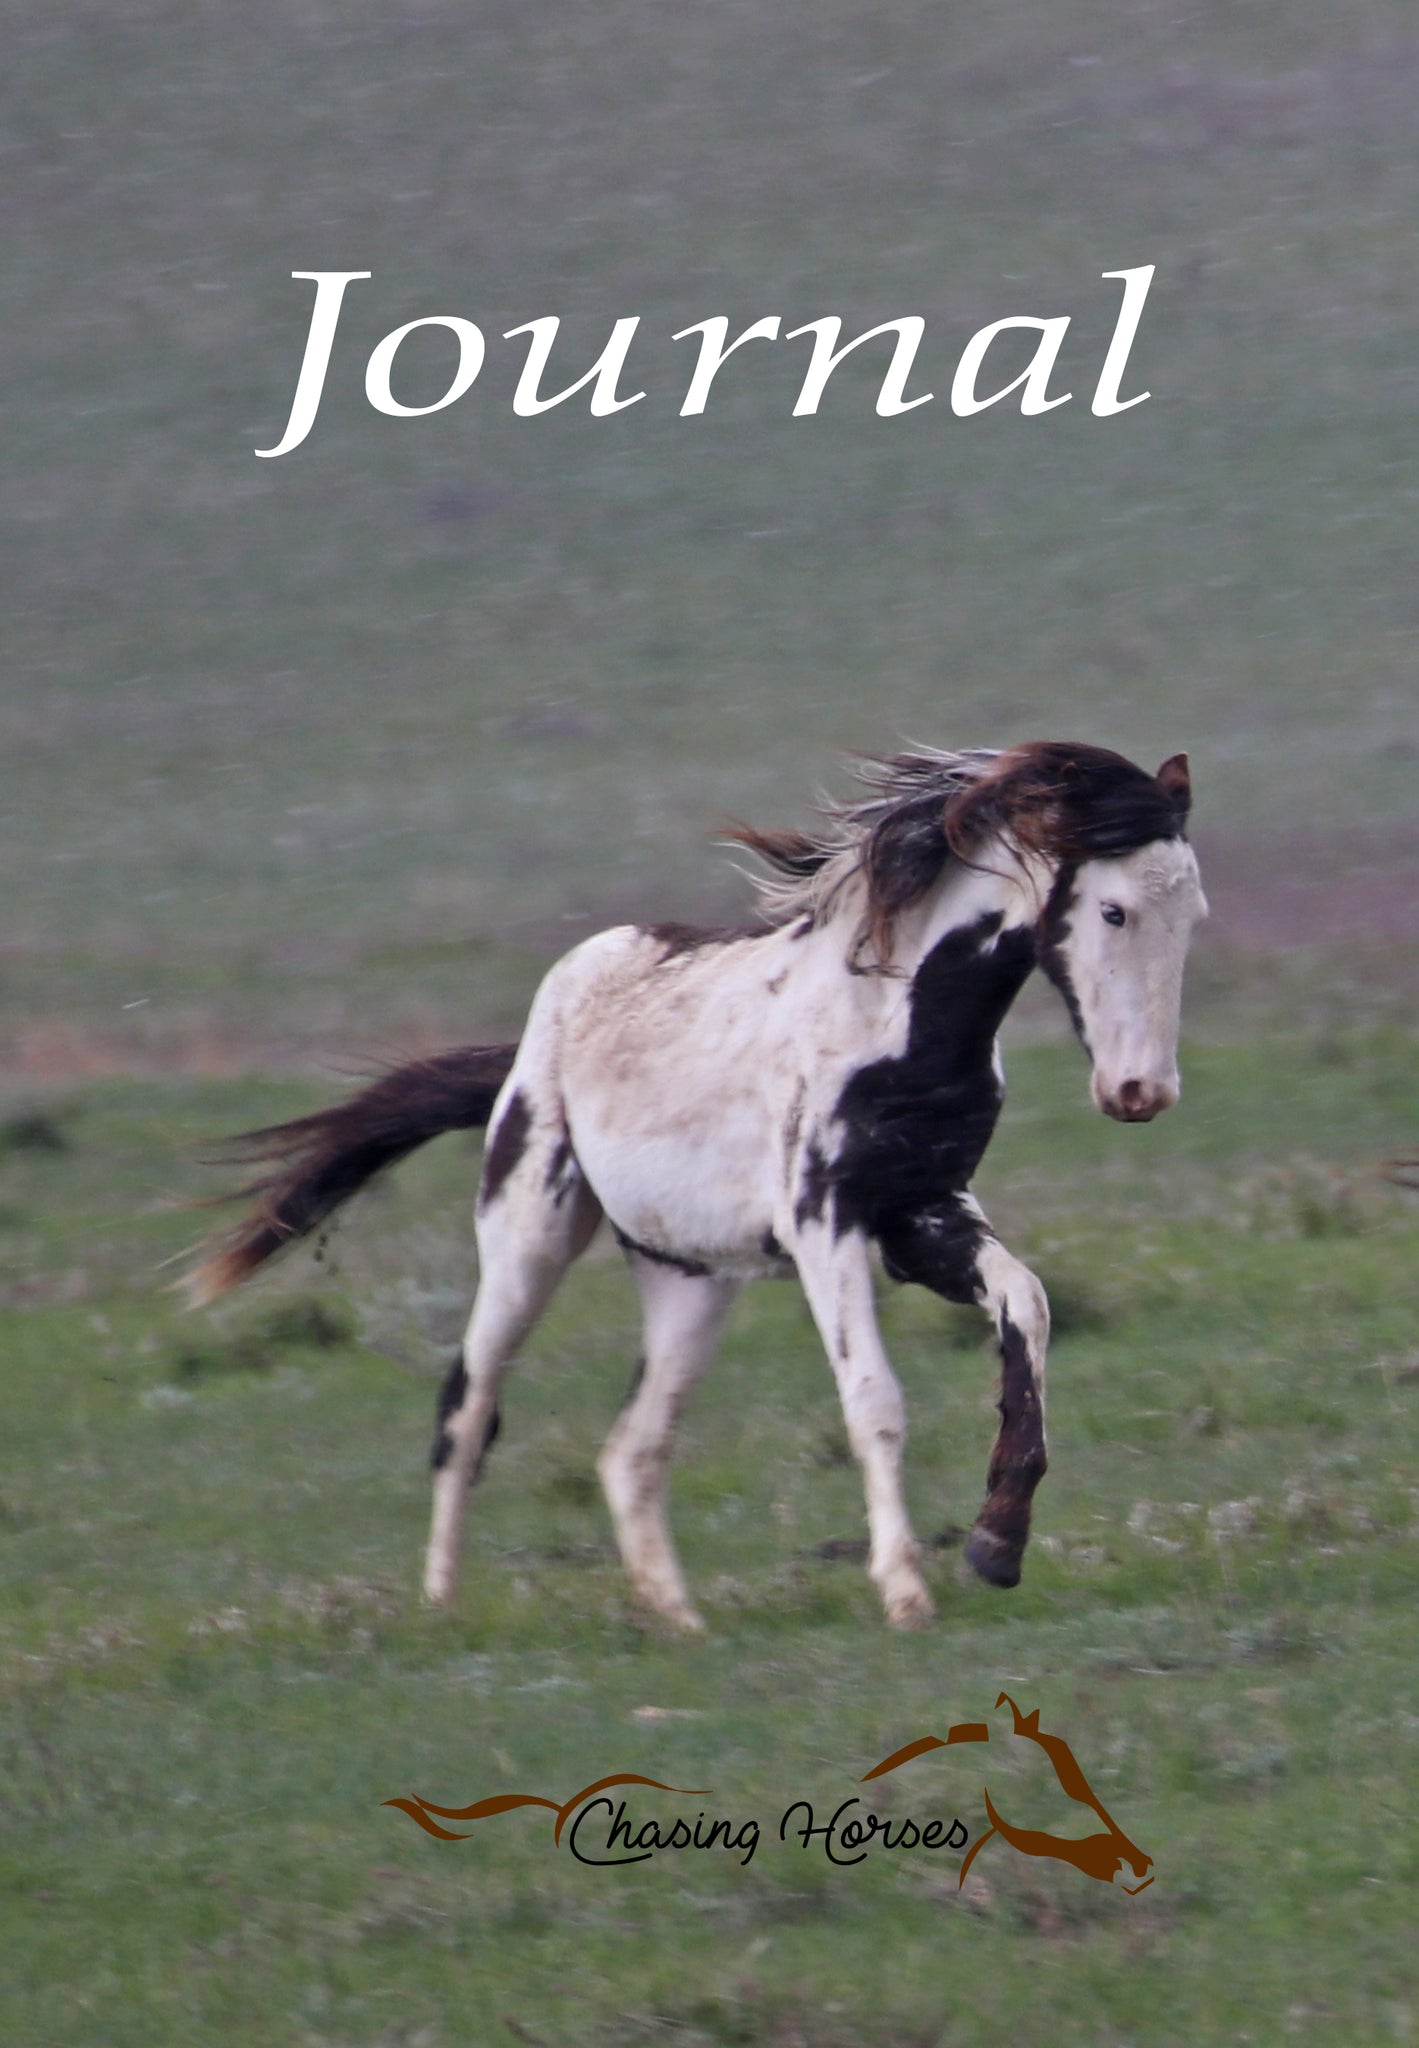 Chasing Horses Journals